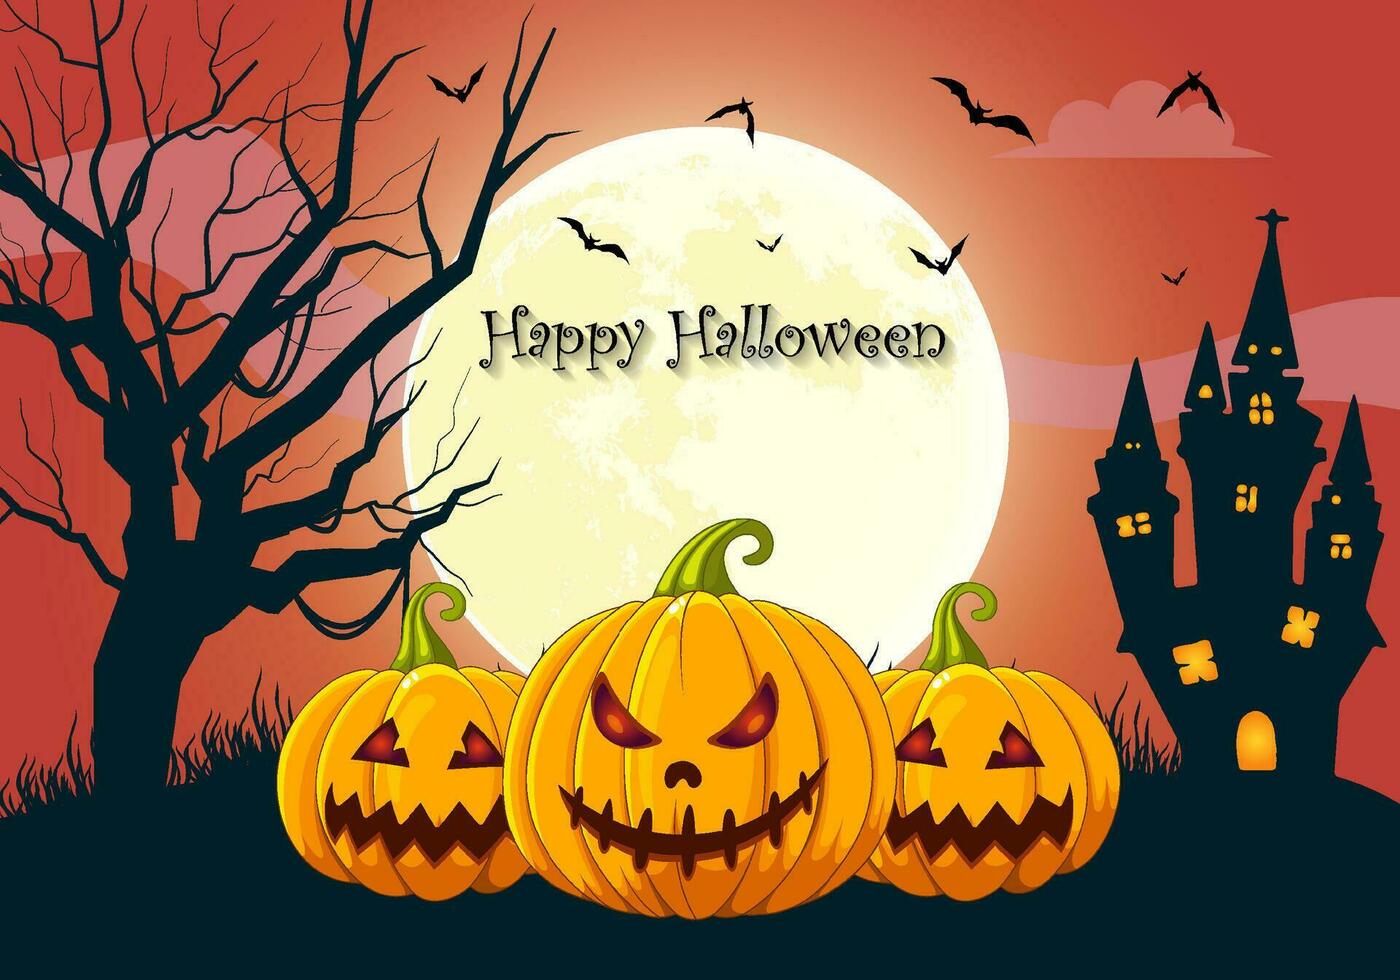 Halloween background with halloween scary pumpkins full moon and haunted house with creepy tree vector